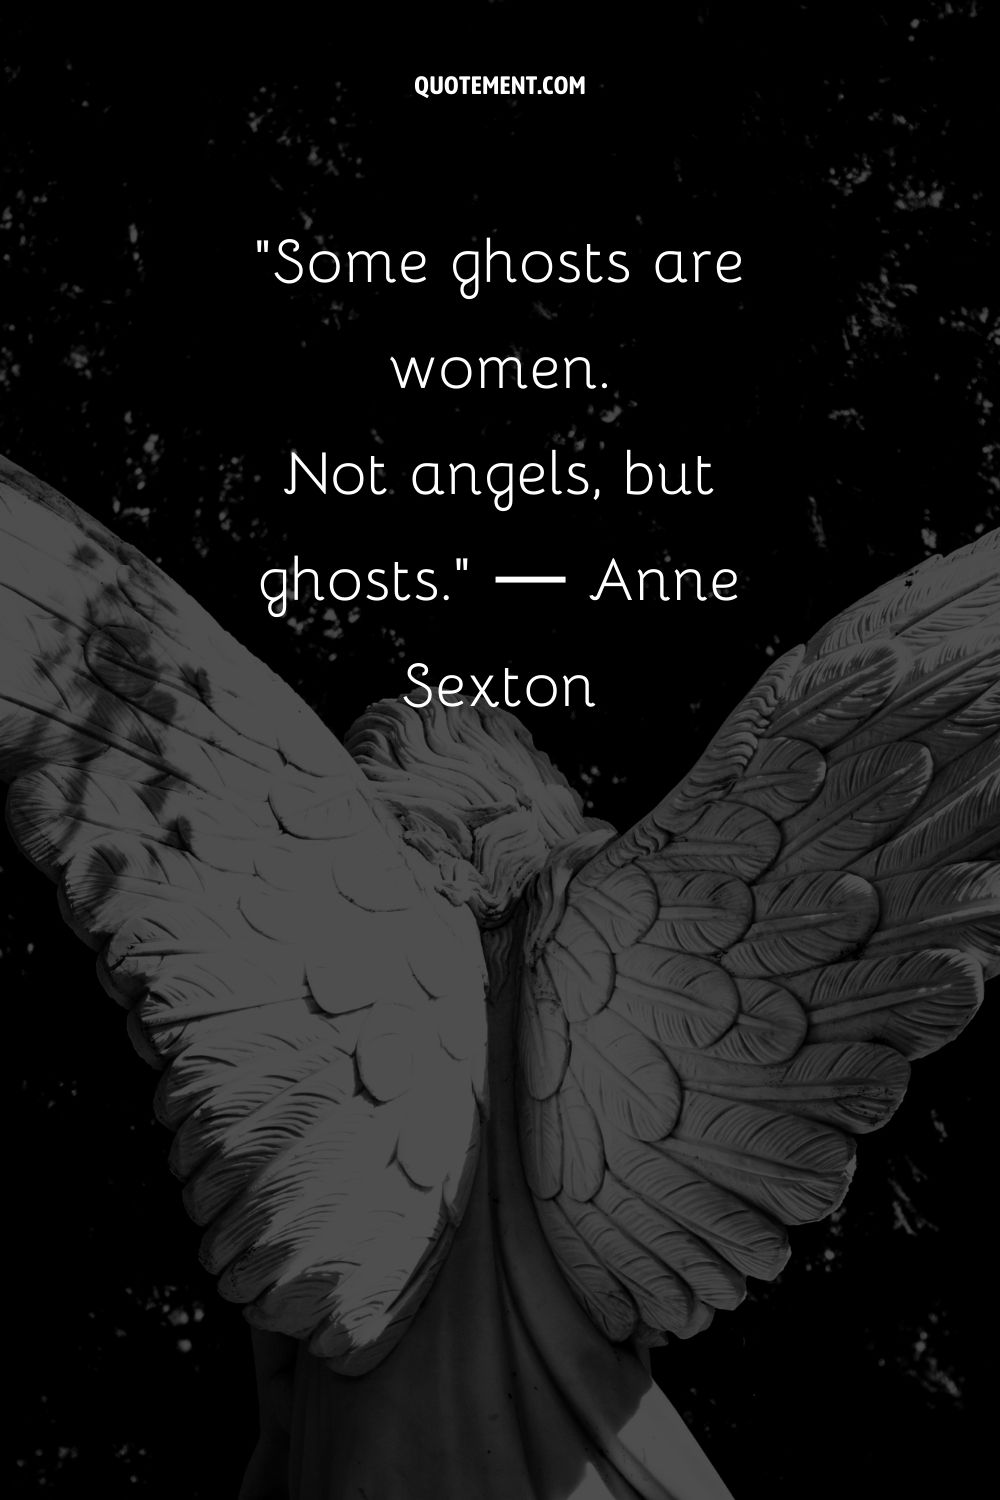 Some ghosts are women. Not angels, but ghosts.